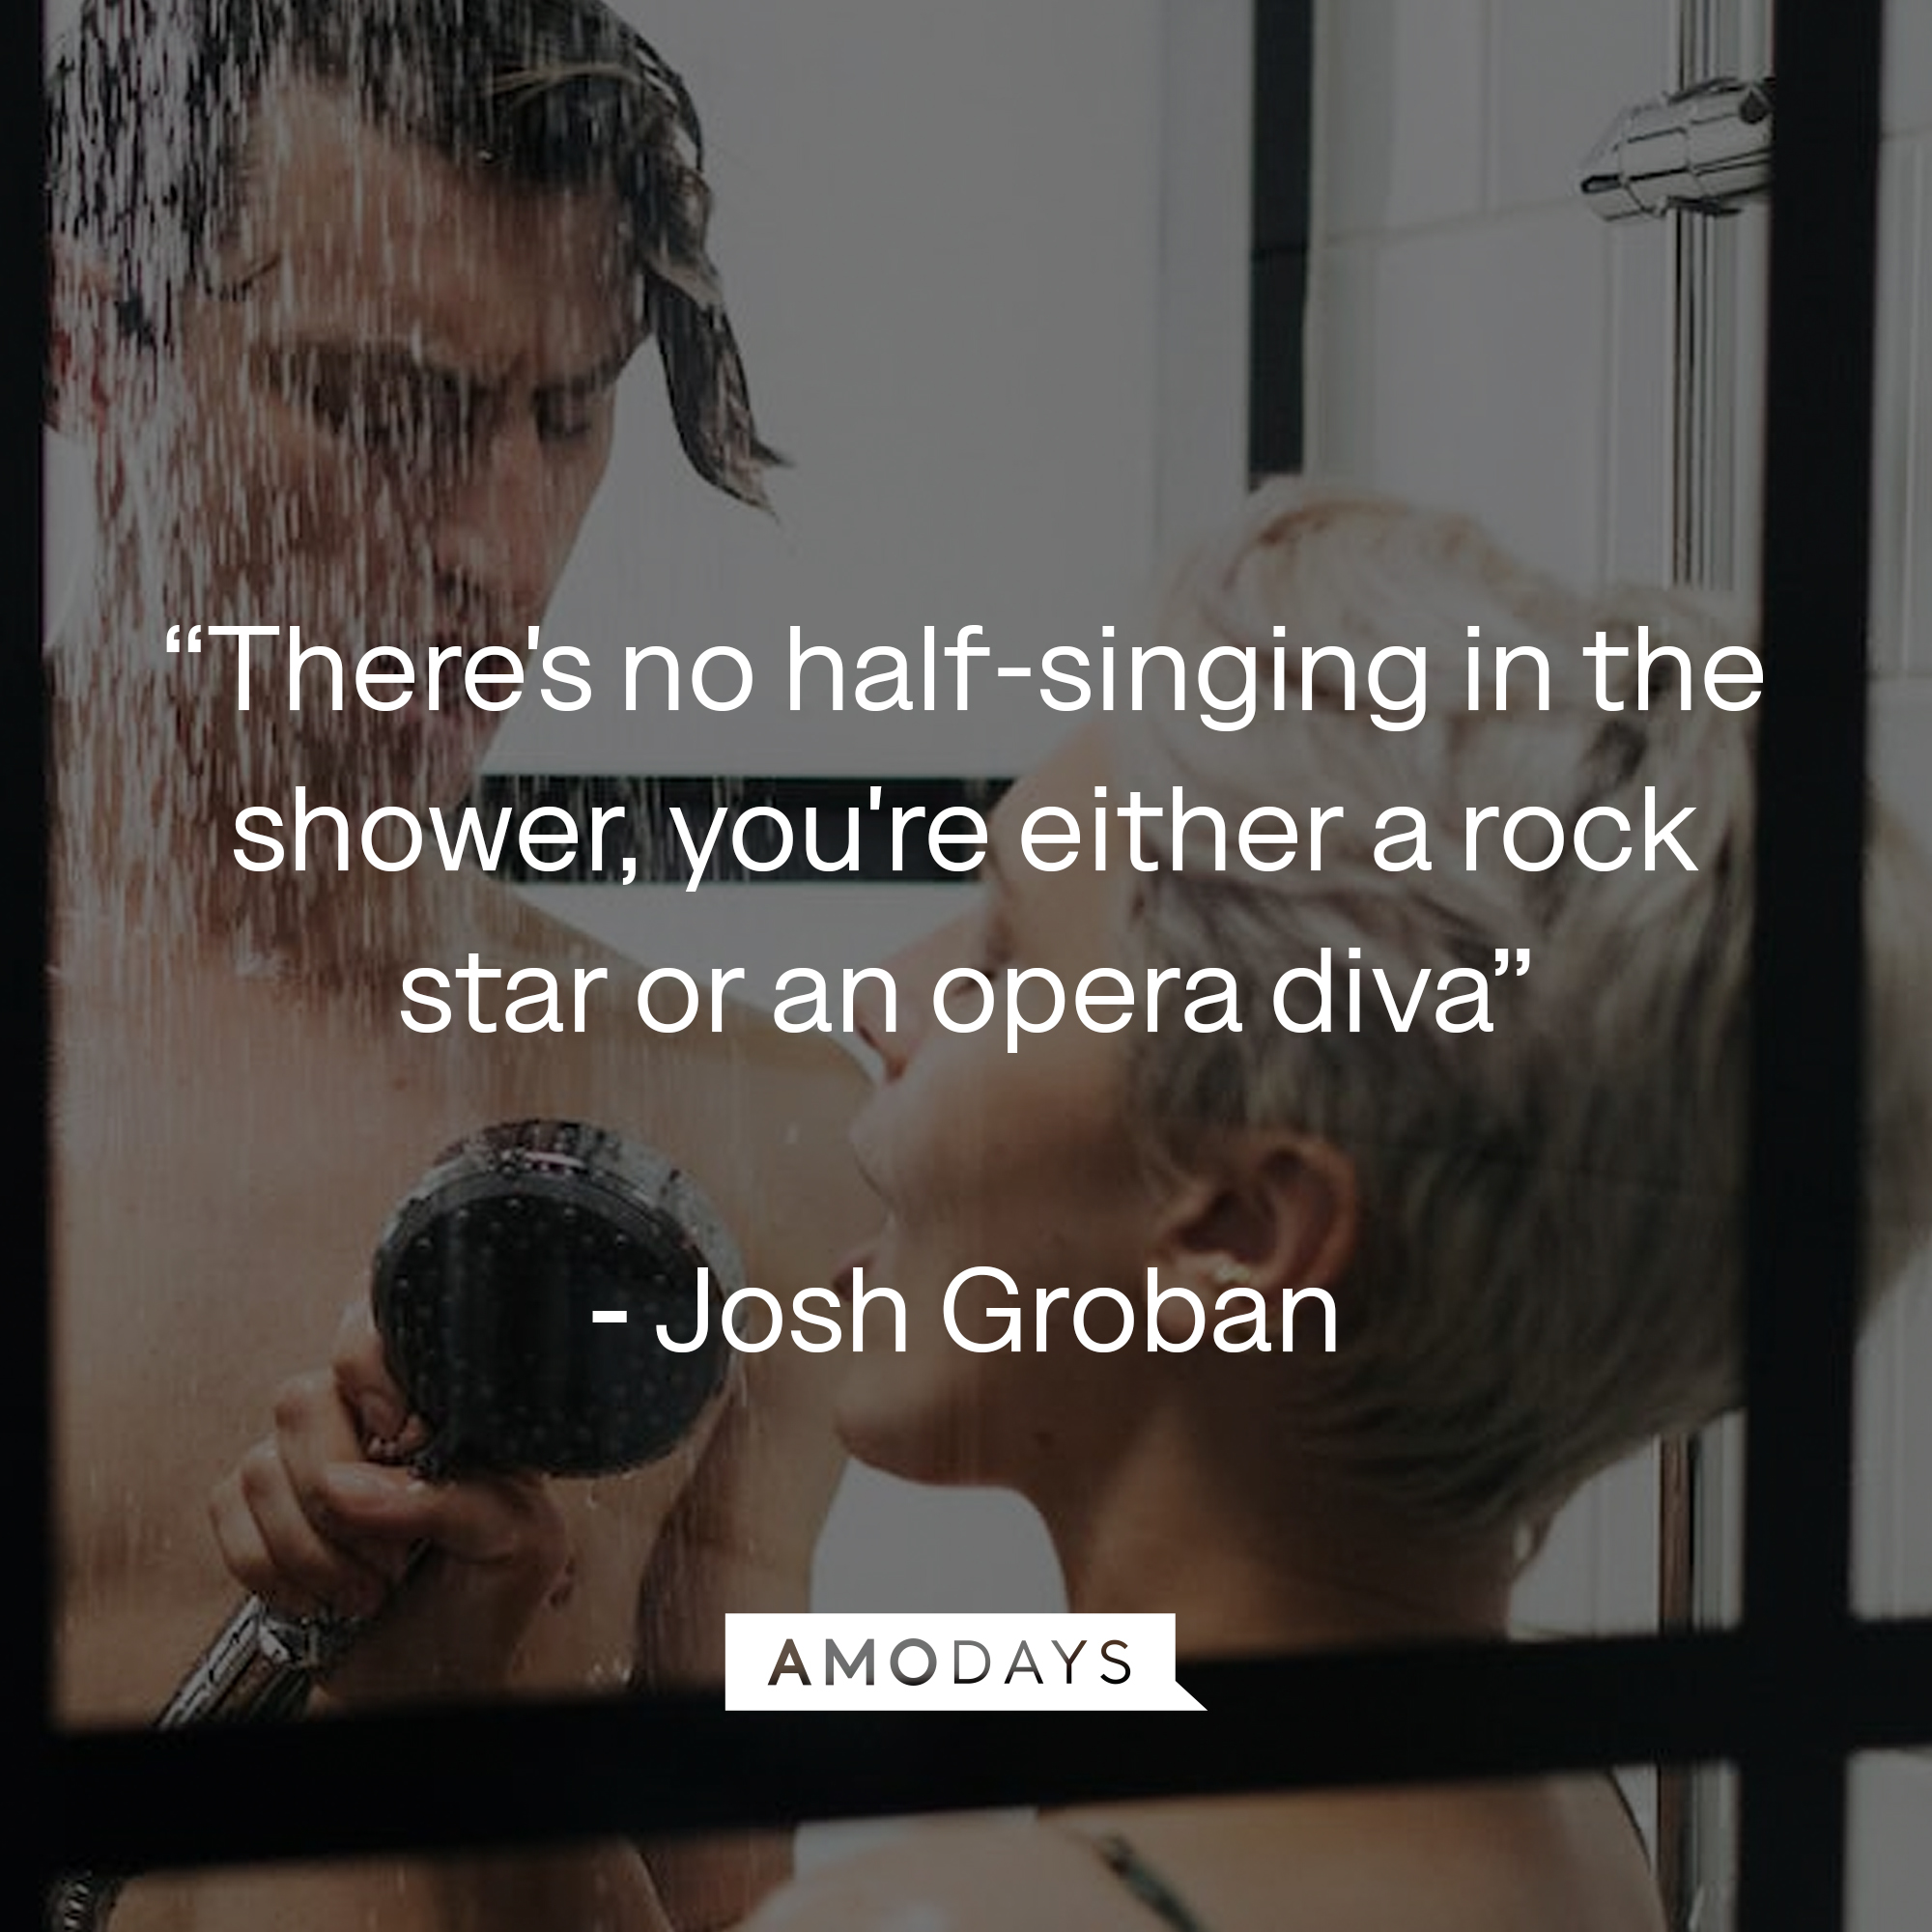 Josh Groban's quote: "There's no half-singing in the shower, you're either a rock star or an opera diva." | Source: azquotes